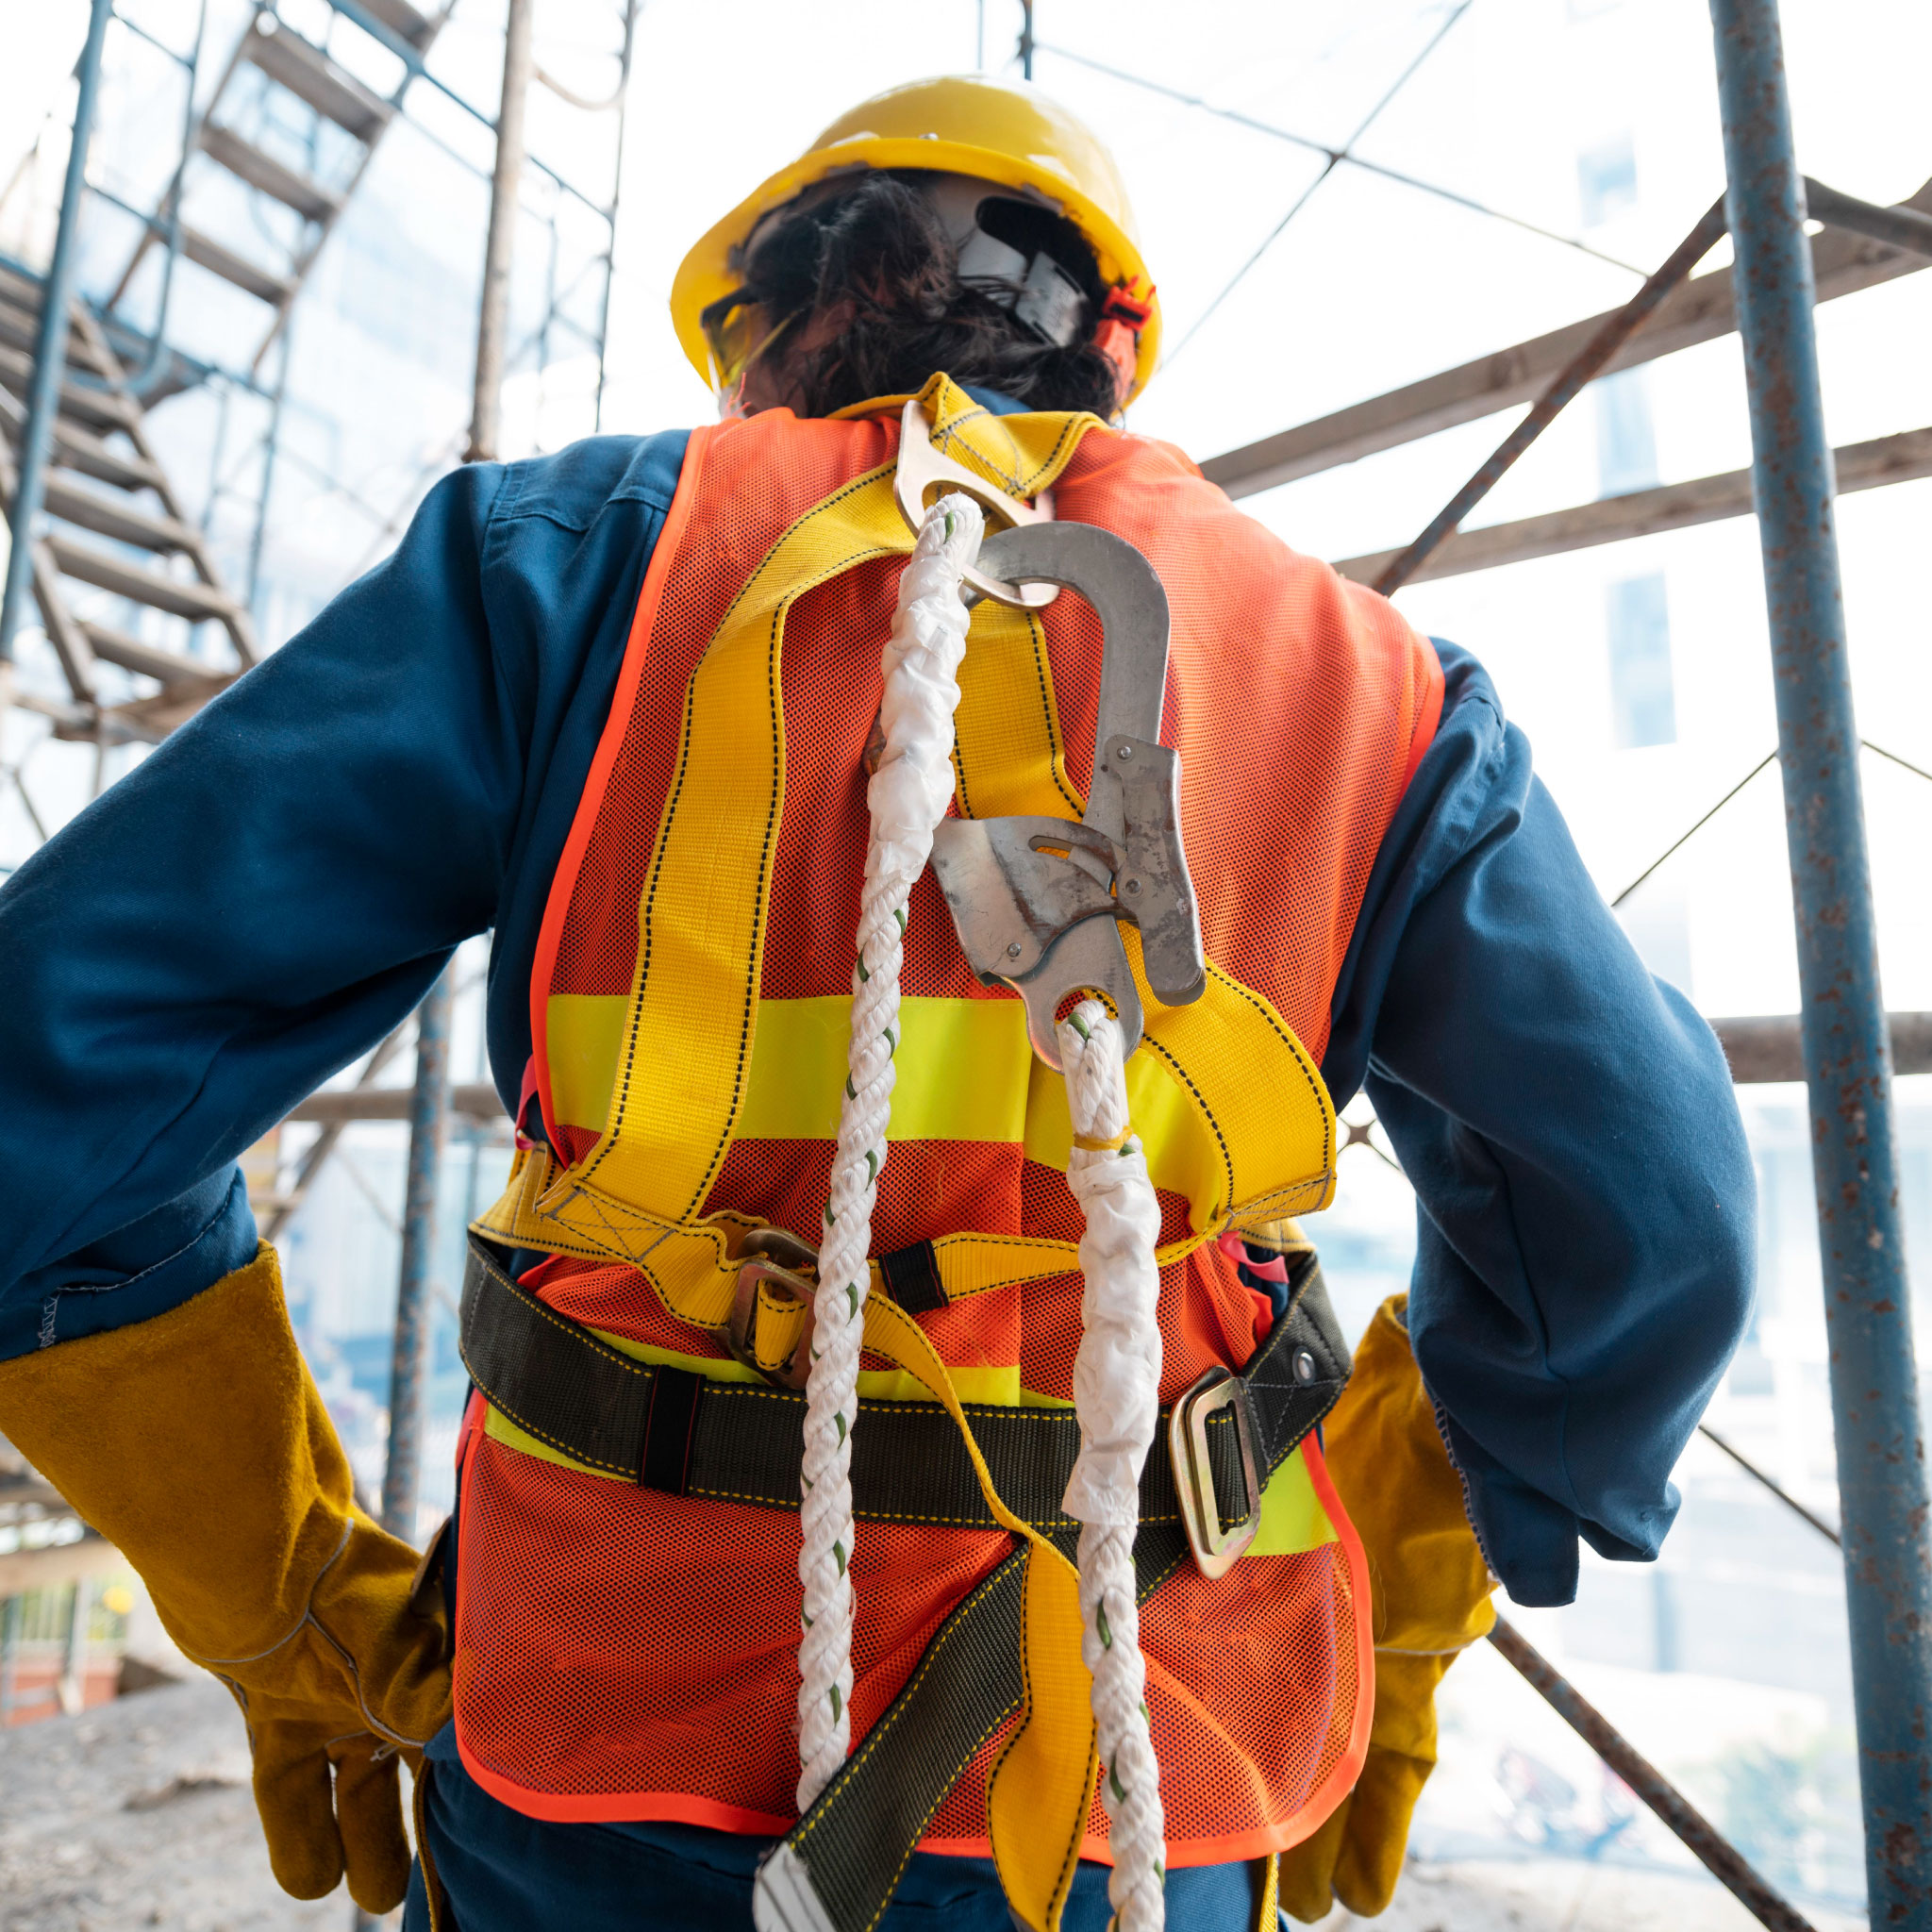 Image of a construction wearing a hard hat and protective gear who has been clipped and harnessed for working at height.